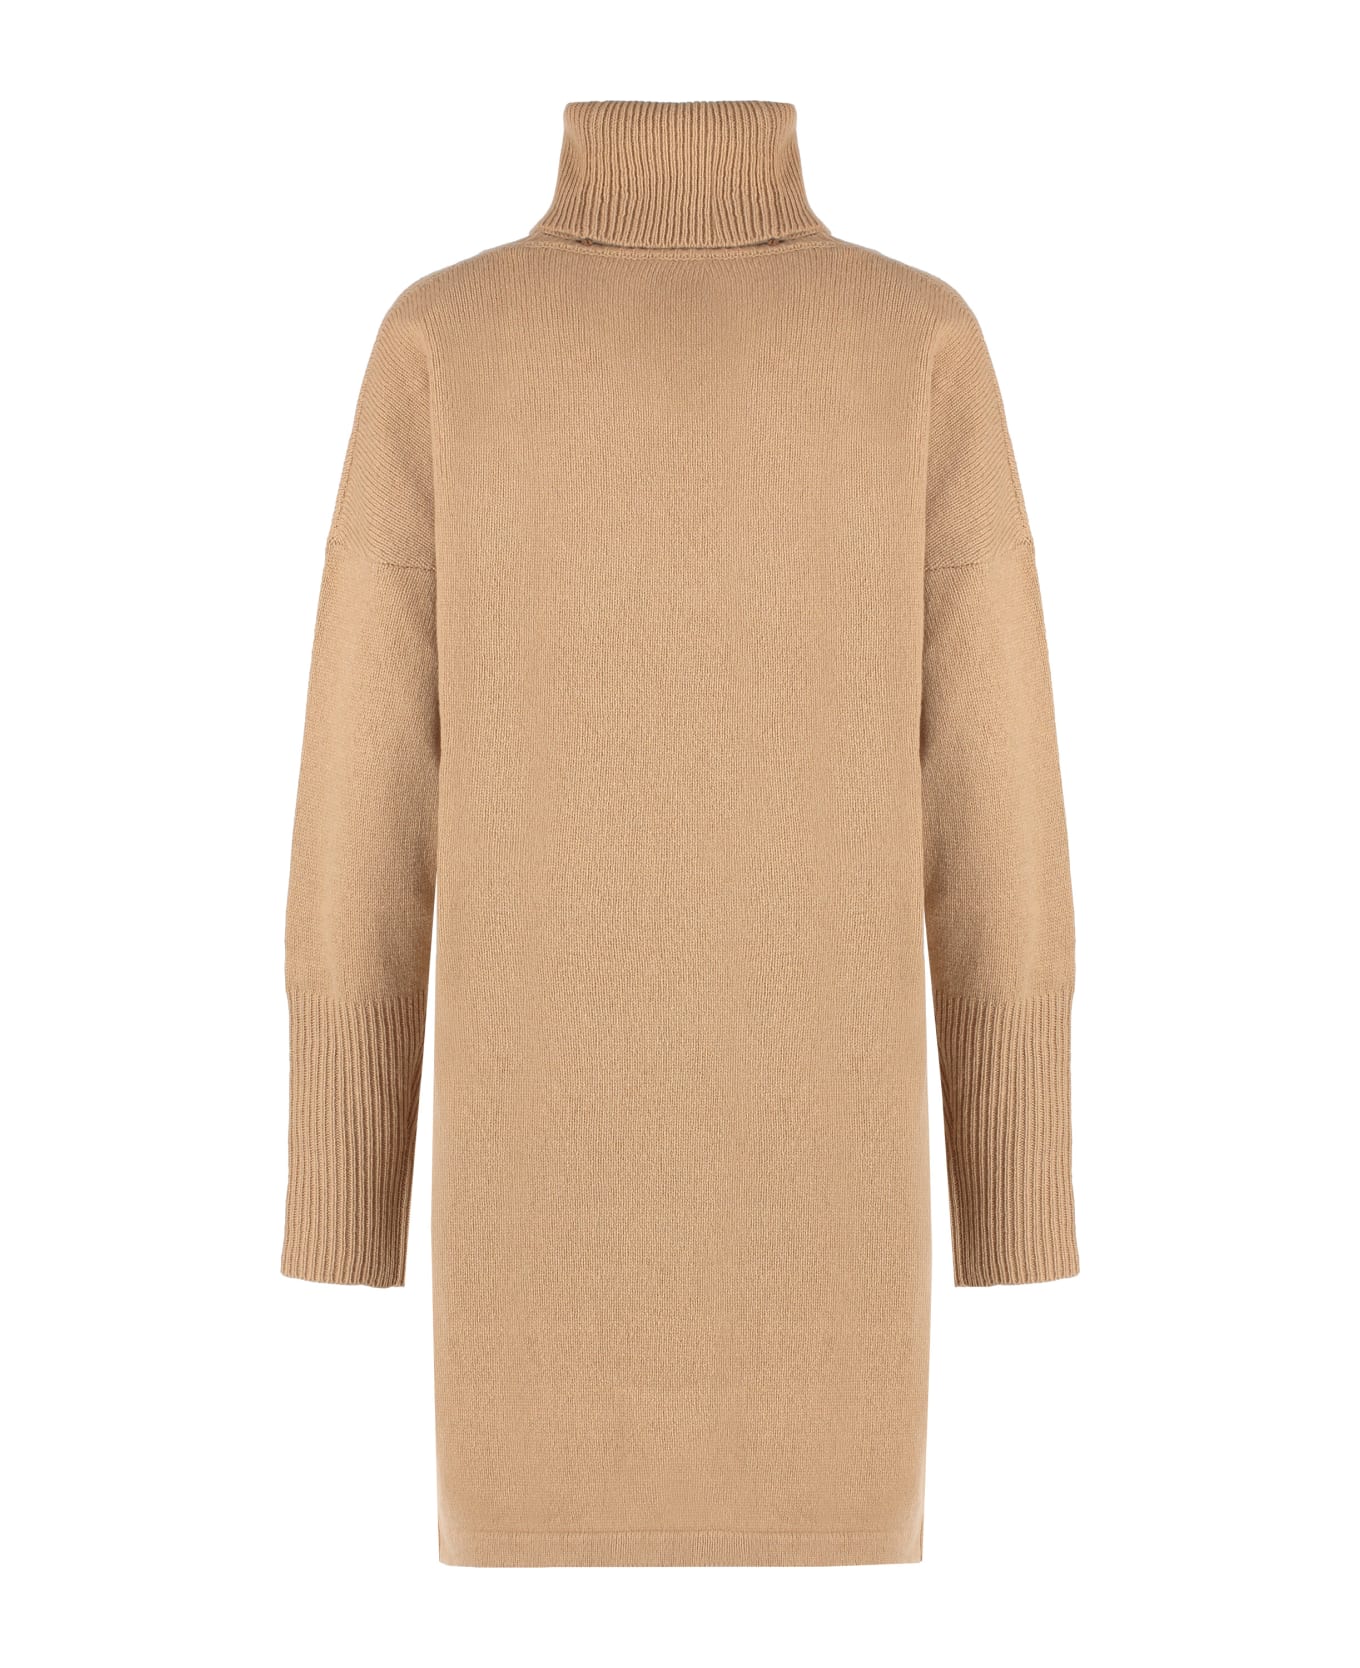 Federica Tosi Ribbed Knit Dress - Camel